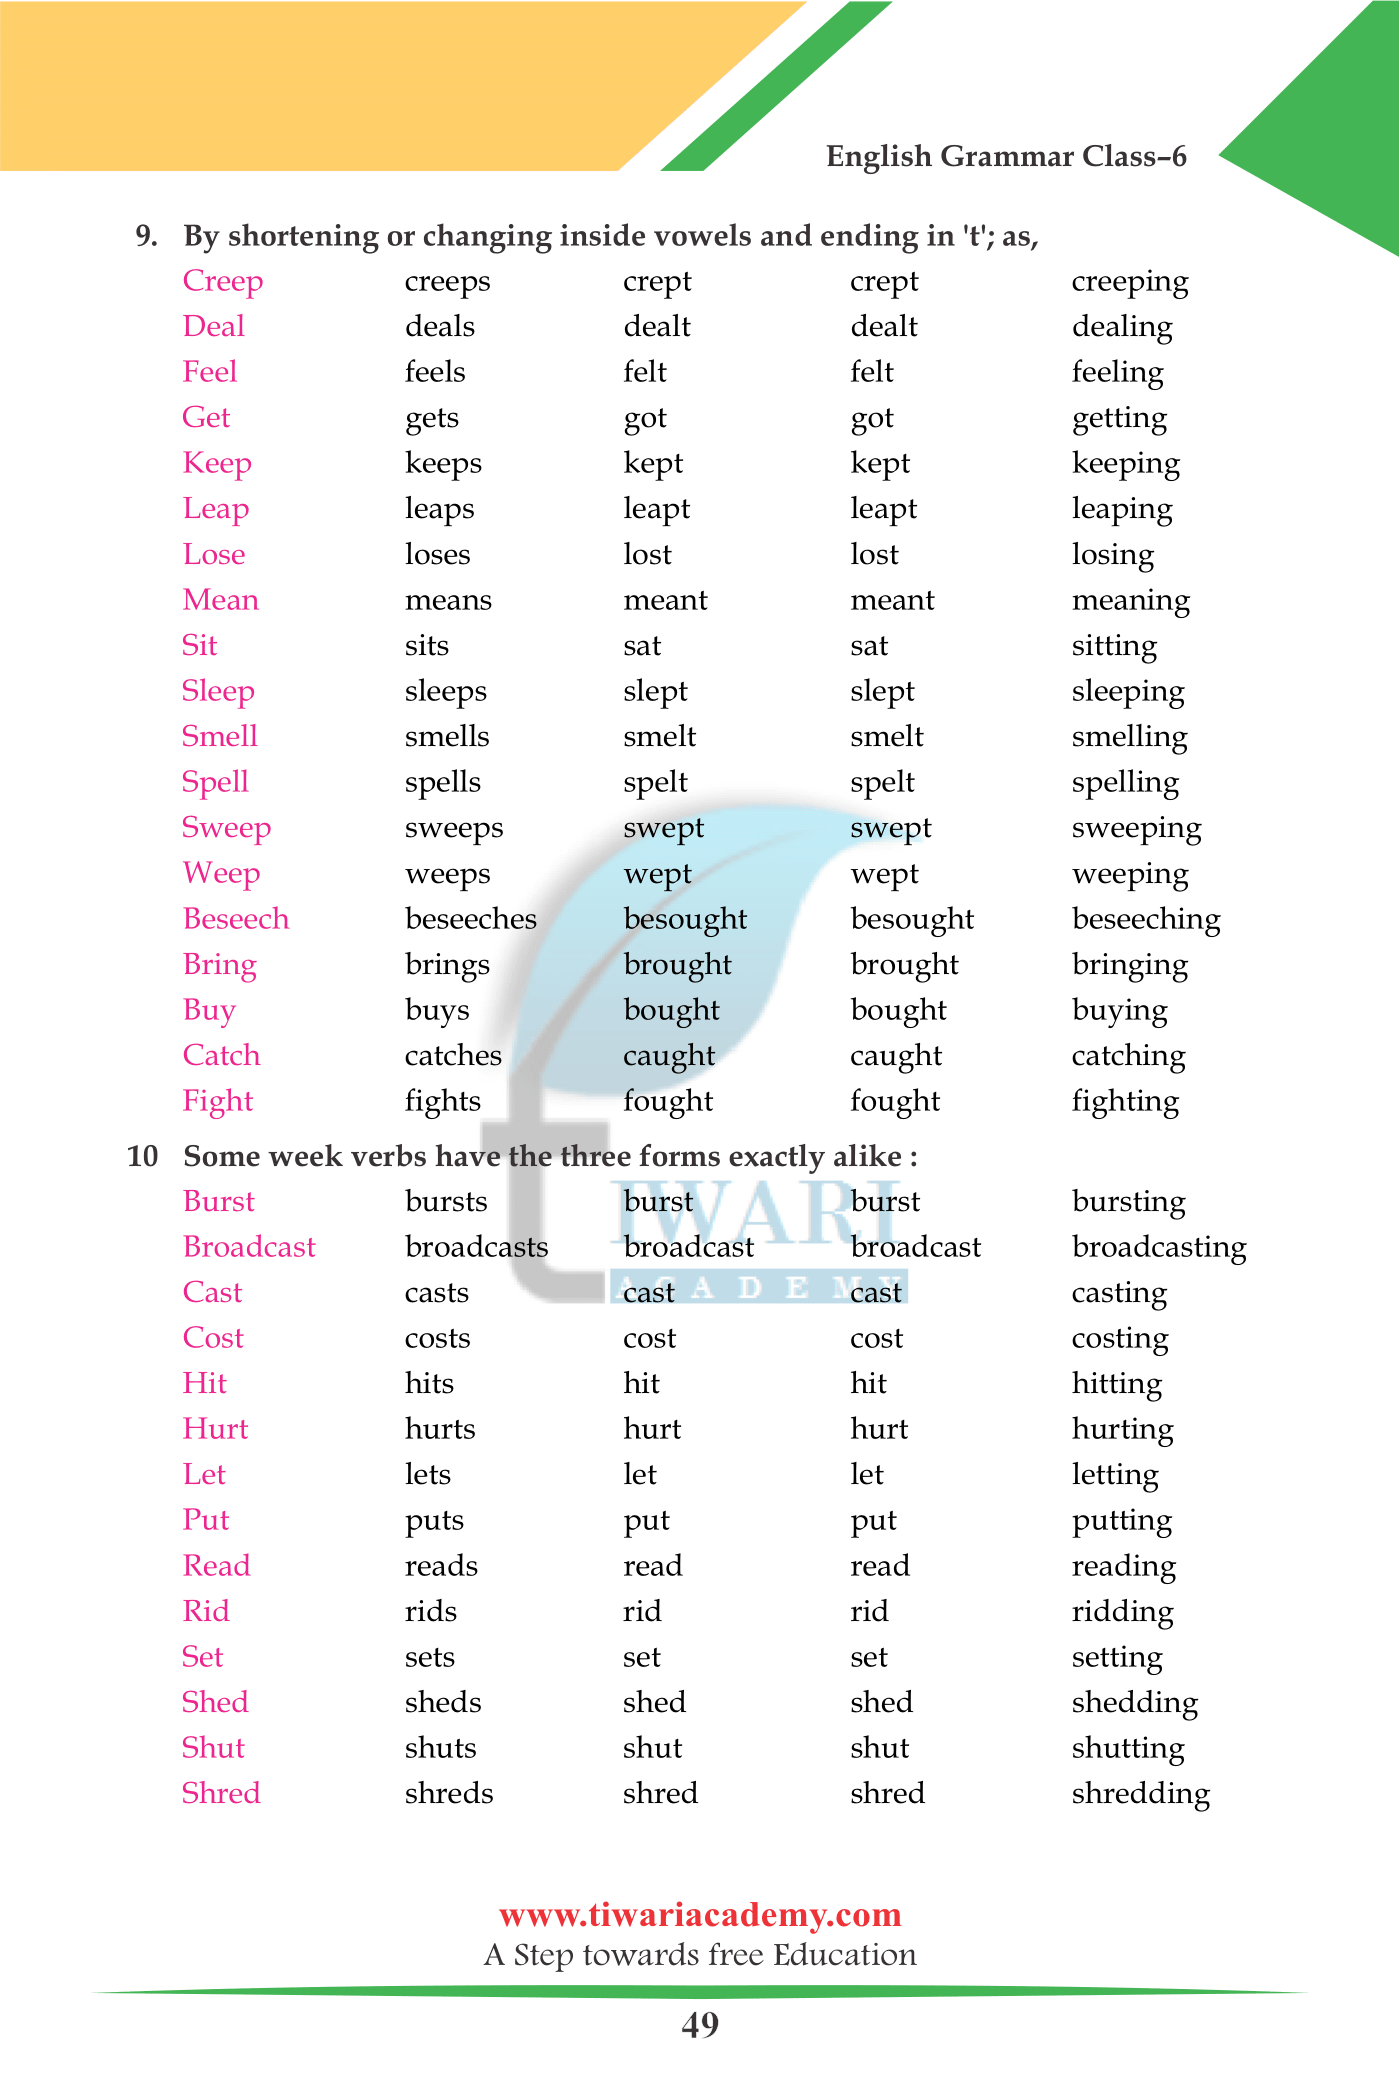 Class 6 English Grammar Chapter 11: Verbs and Their Forms PDF Video.